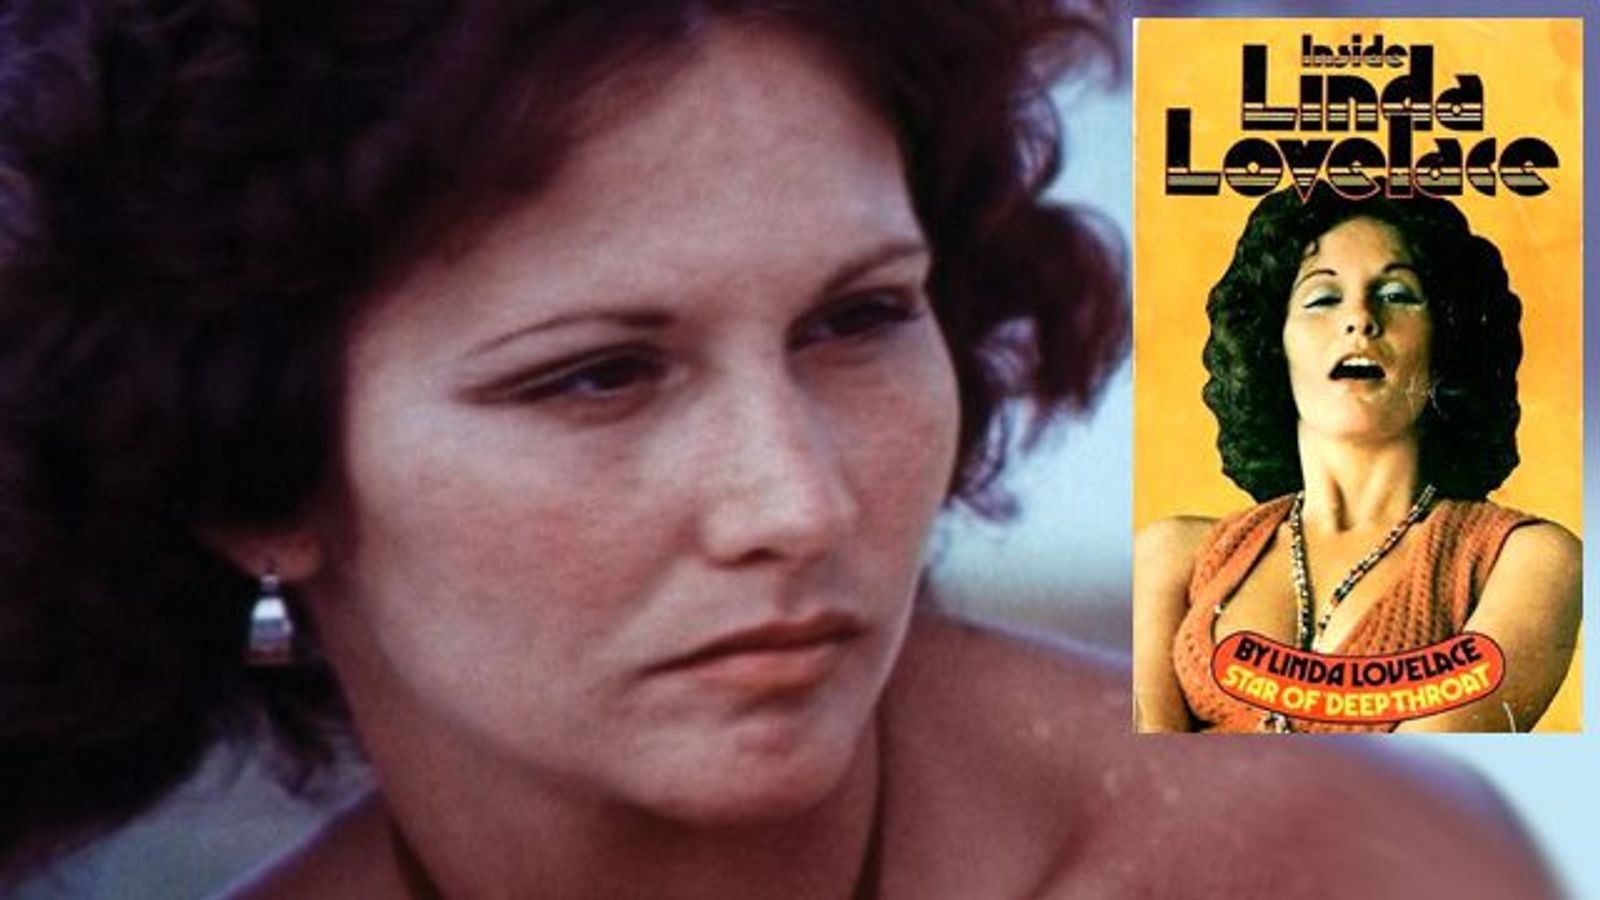 The Race to Release the First Linda Lovelace Biopic